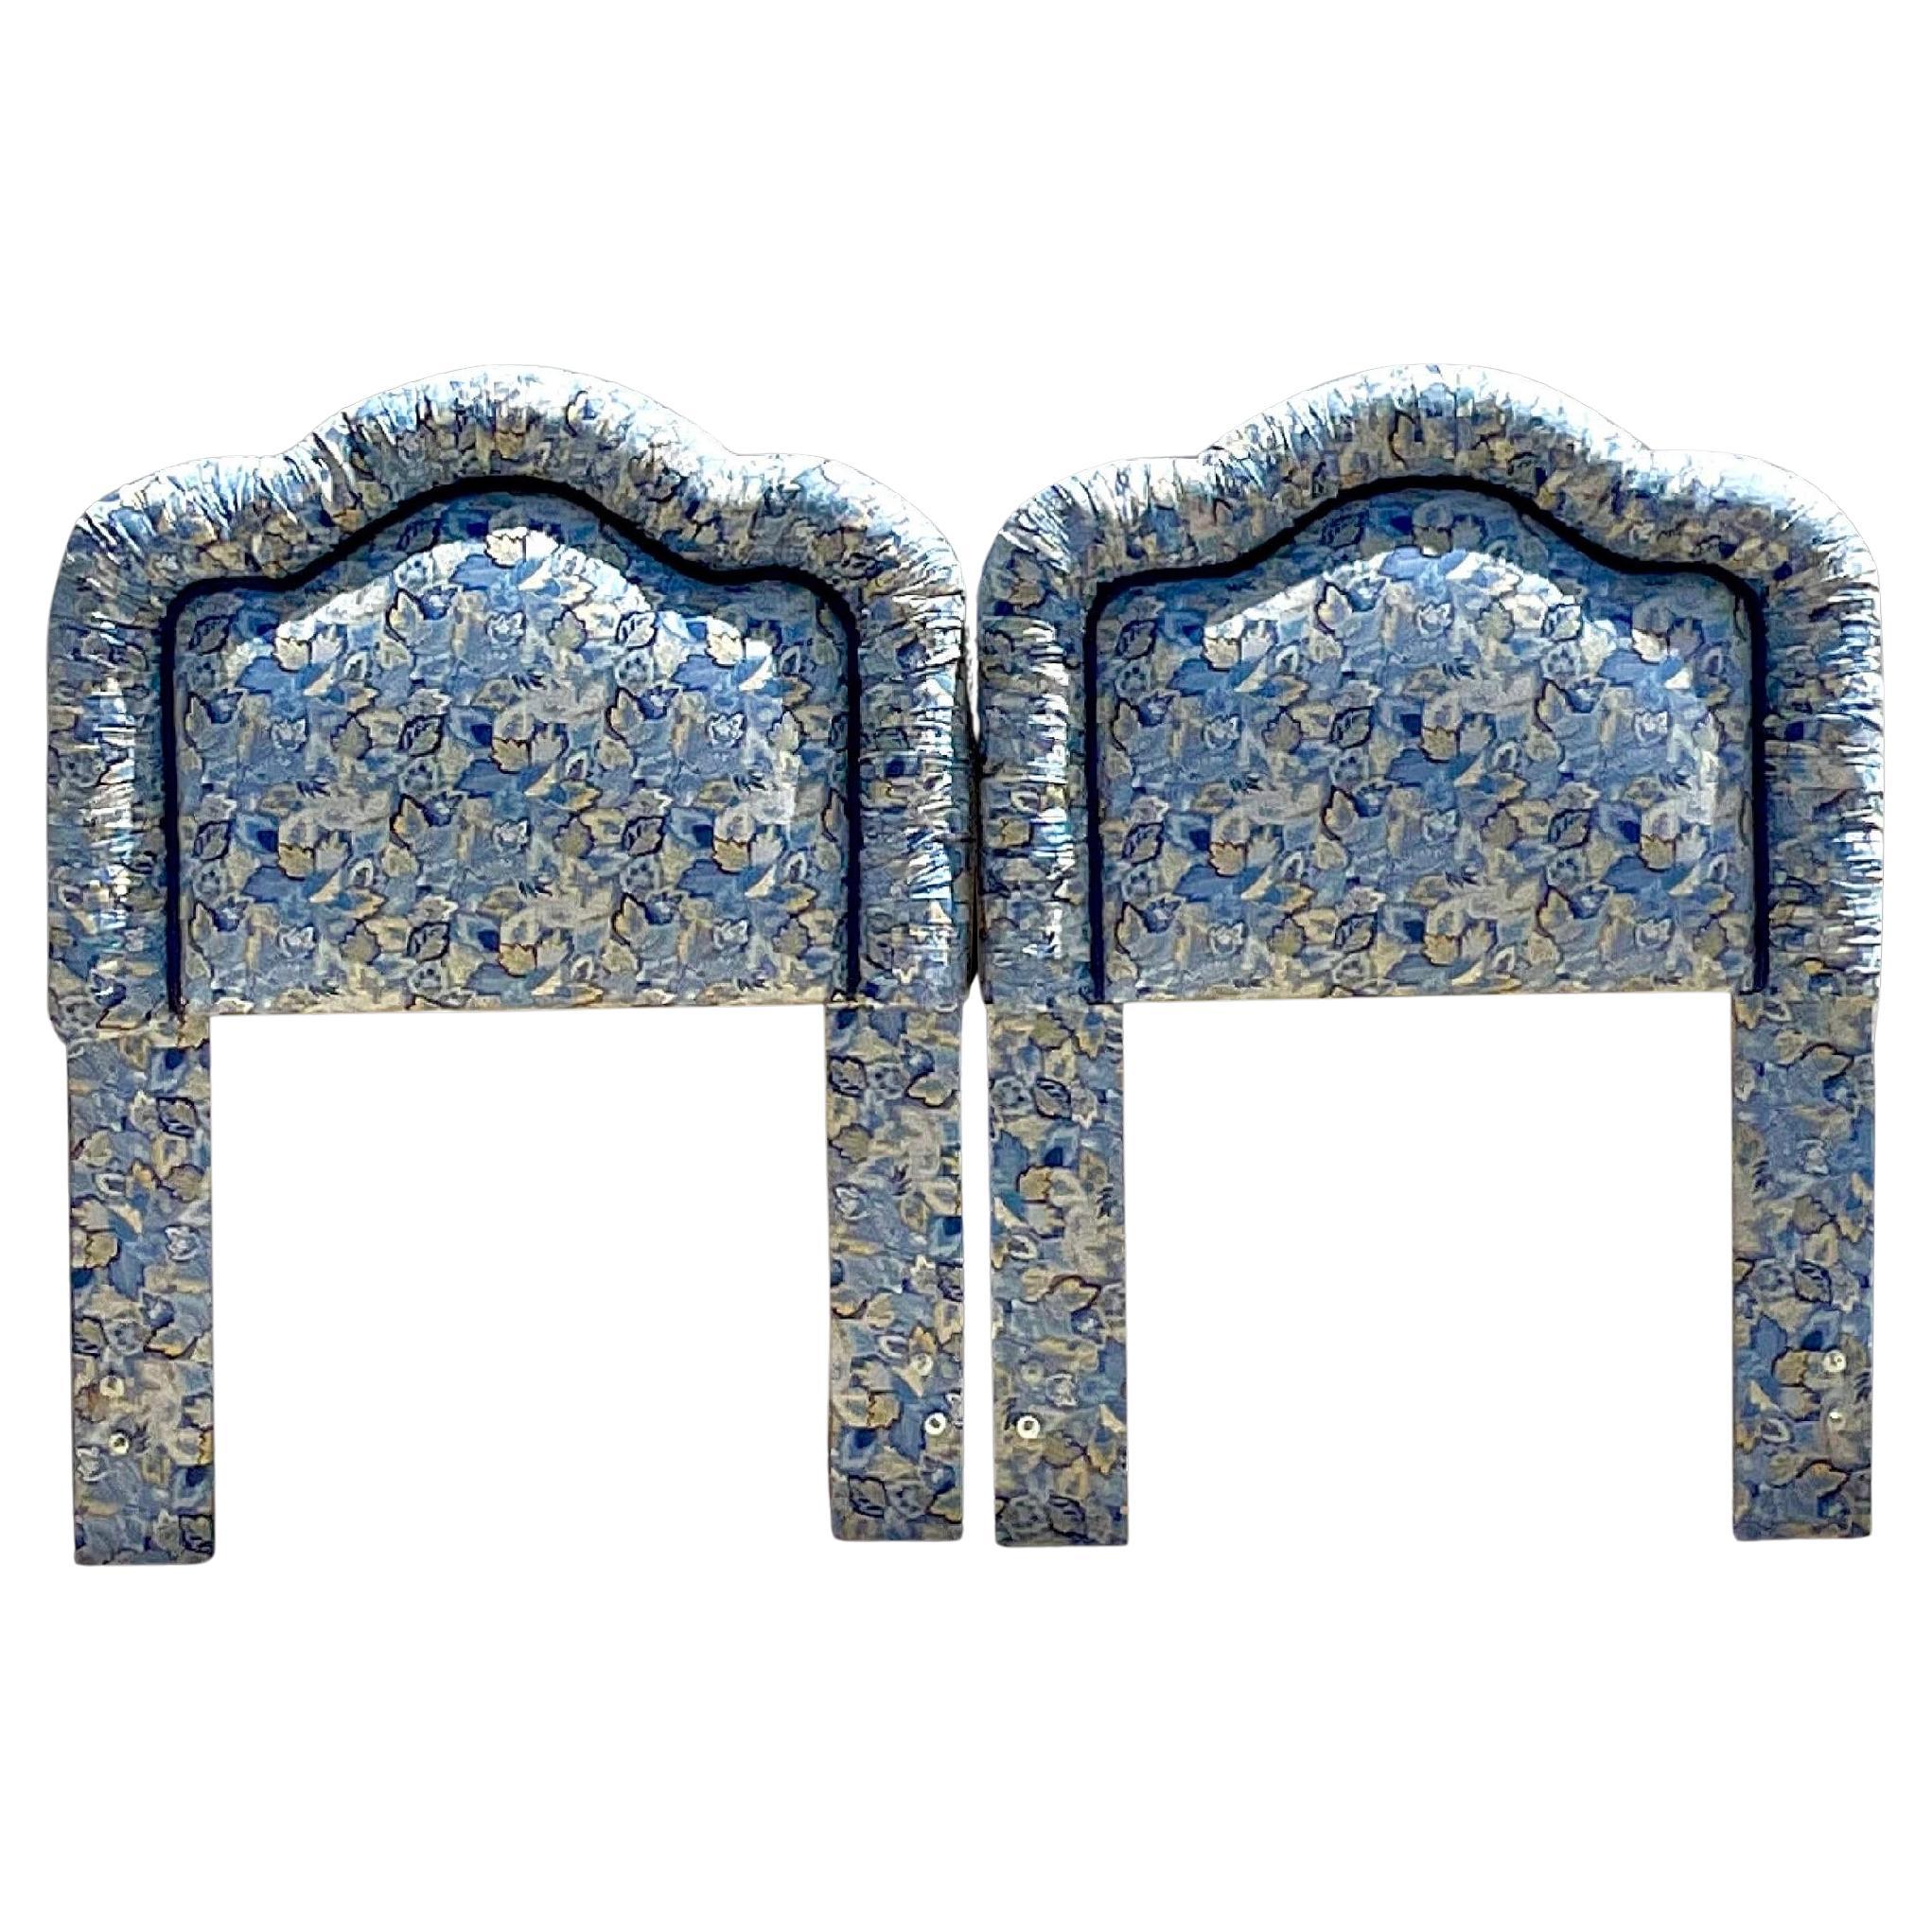 Late 20th Century Vintage Boho Paisley Upholstered Twin Headboards - a Pair For Sale